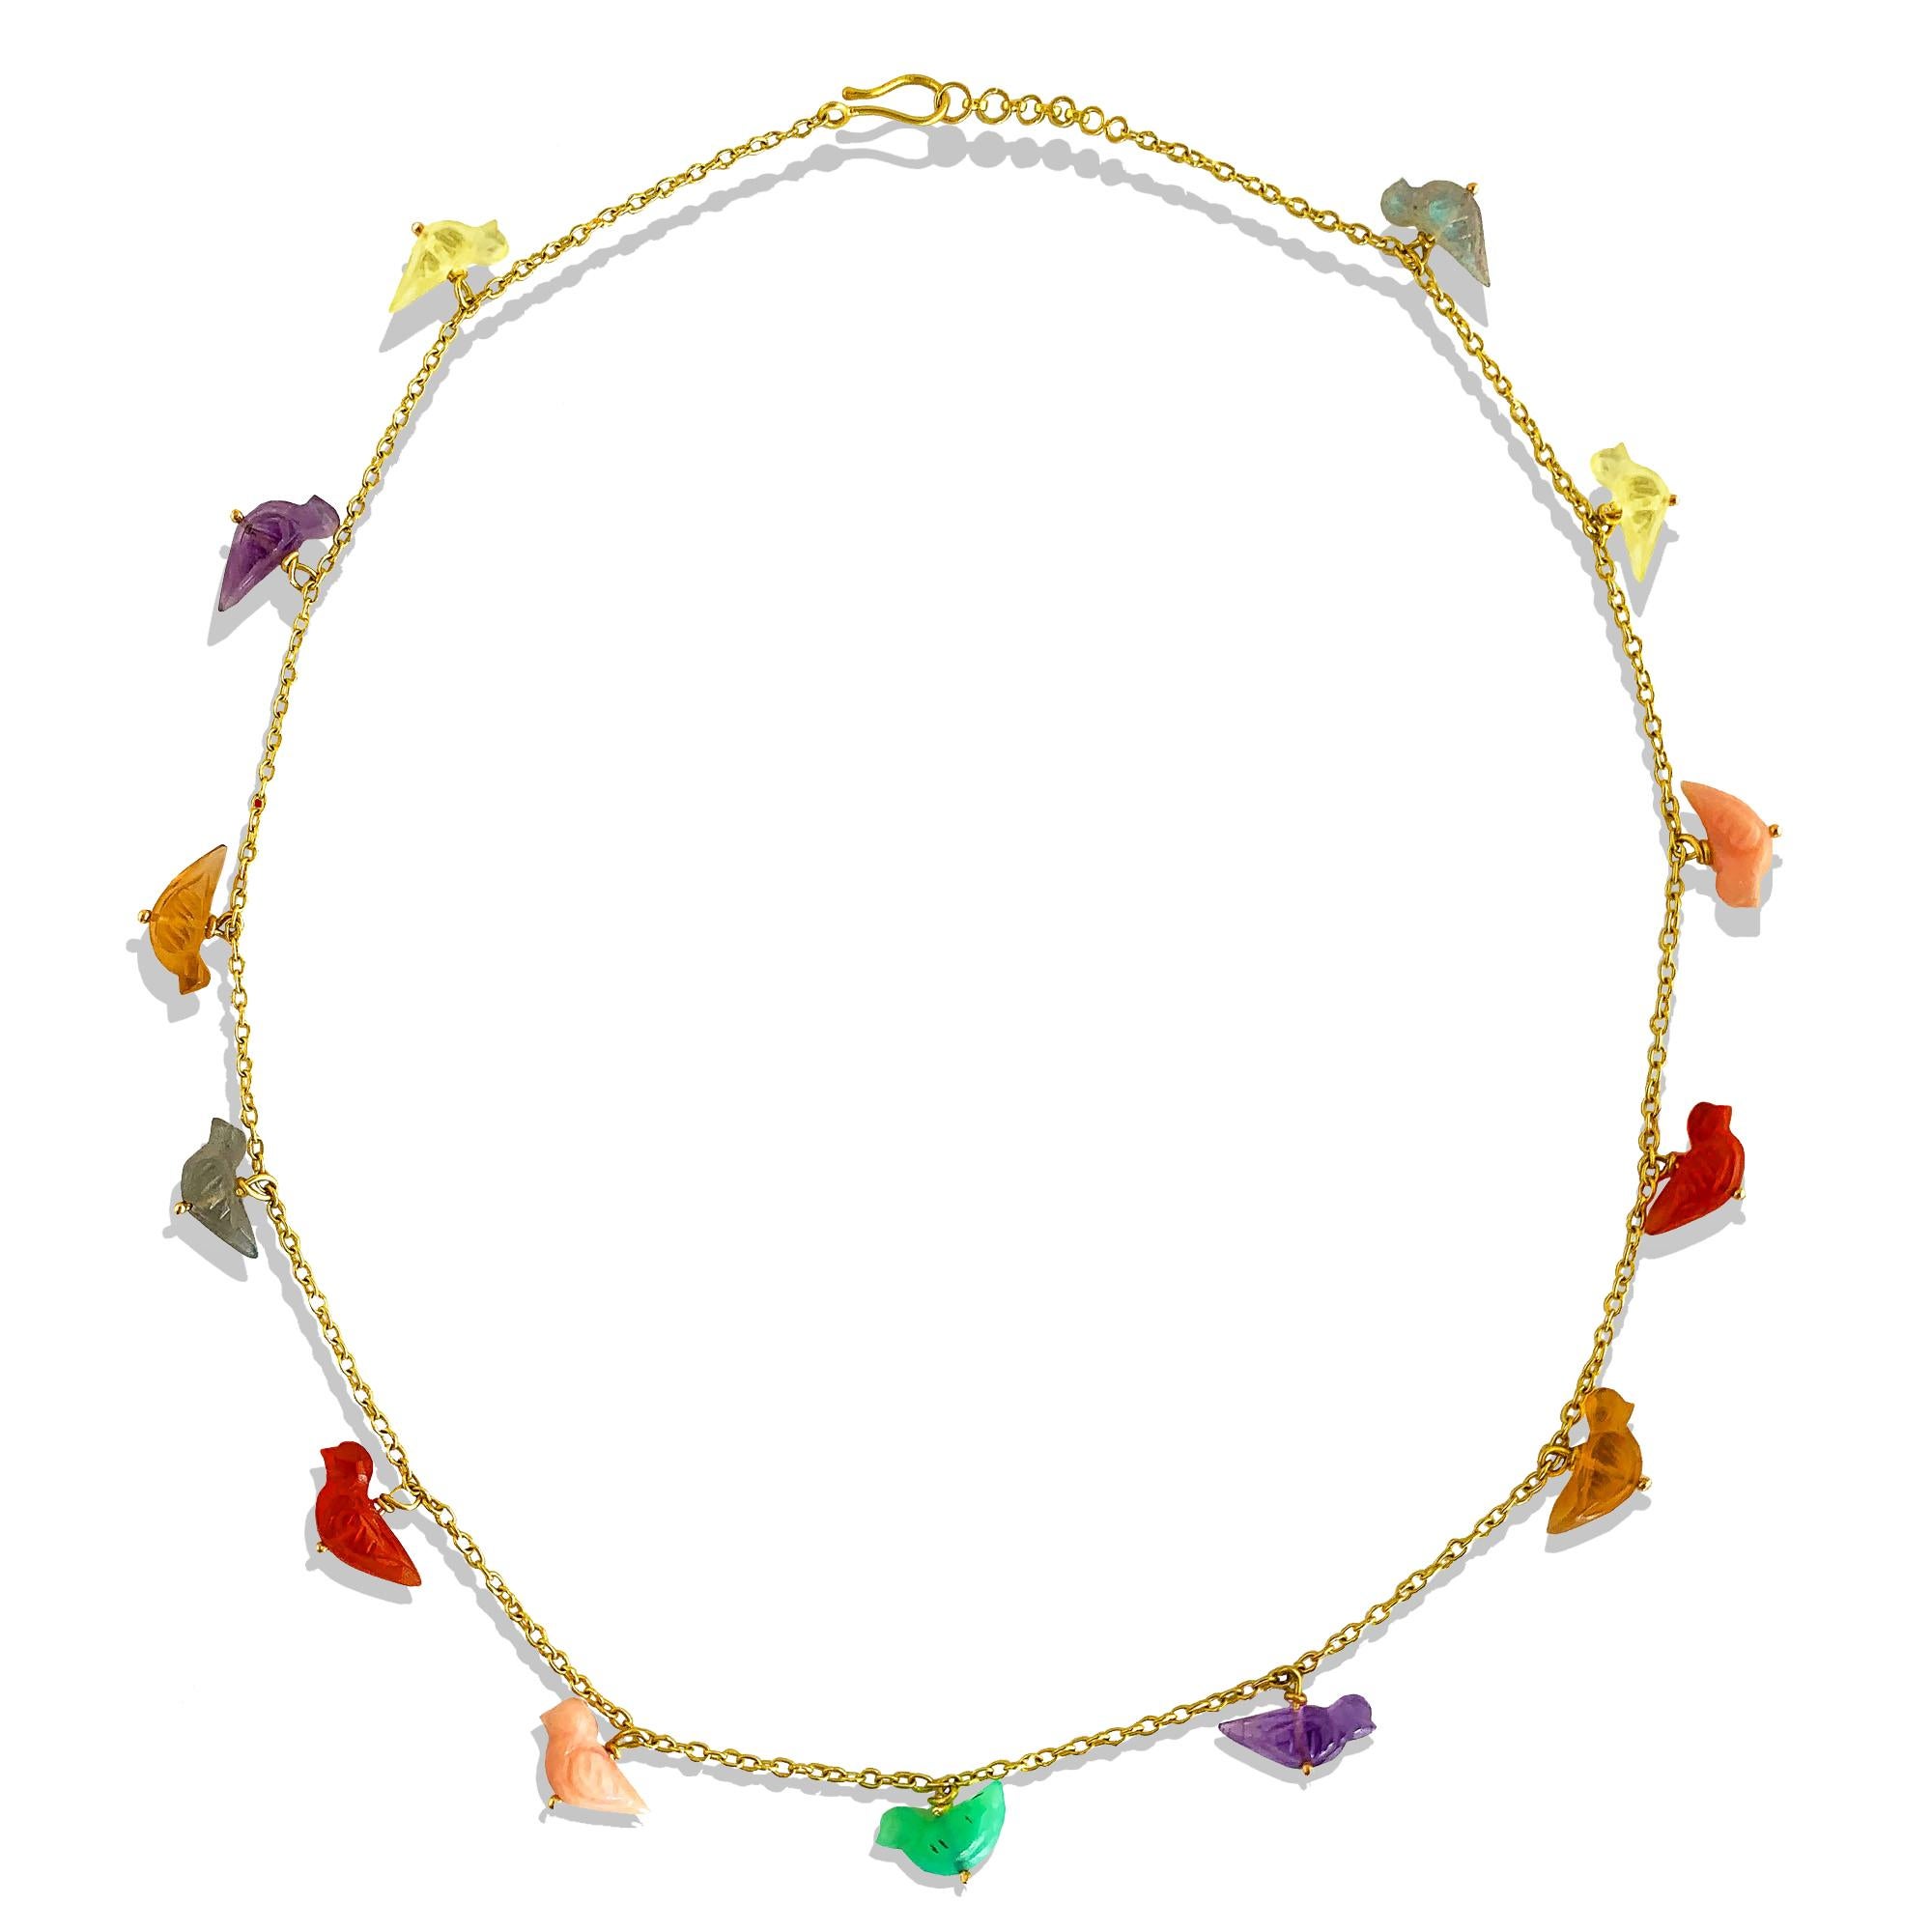 Hand Carved Necklace featuring gemstone birds in a rainbow of colors.  Lemon Quartz, Amethyst, Citrine, Labradorite, Carnelian, Chrysoprase, and Pink Opal birds hang from a 22k gold hand made chain.   I hook clasp completes the necklace.  Measures